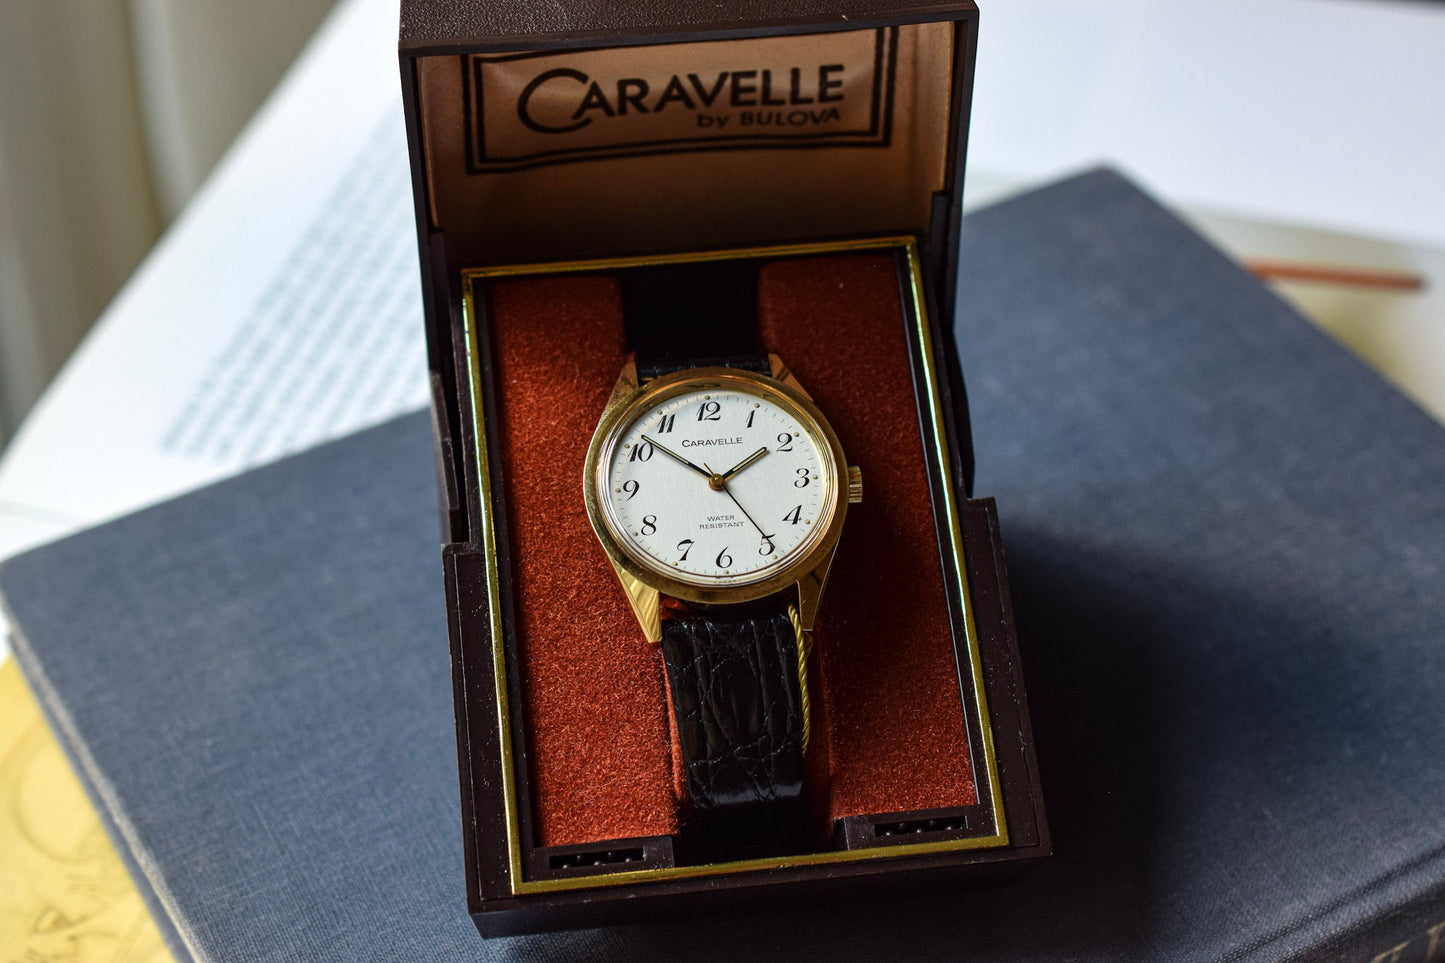 New Old Stock 1981 Mechanical Caravelle Watch